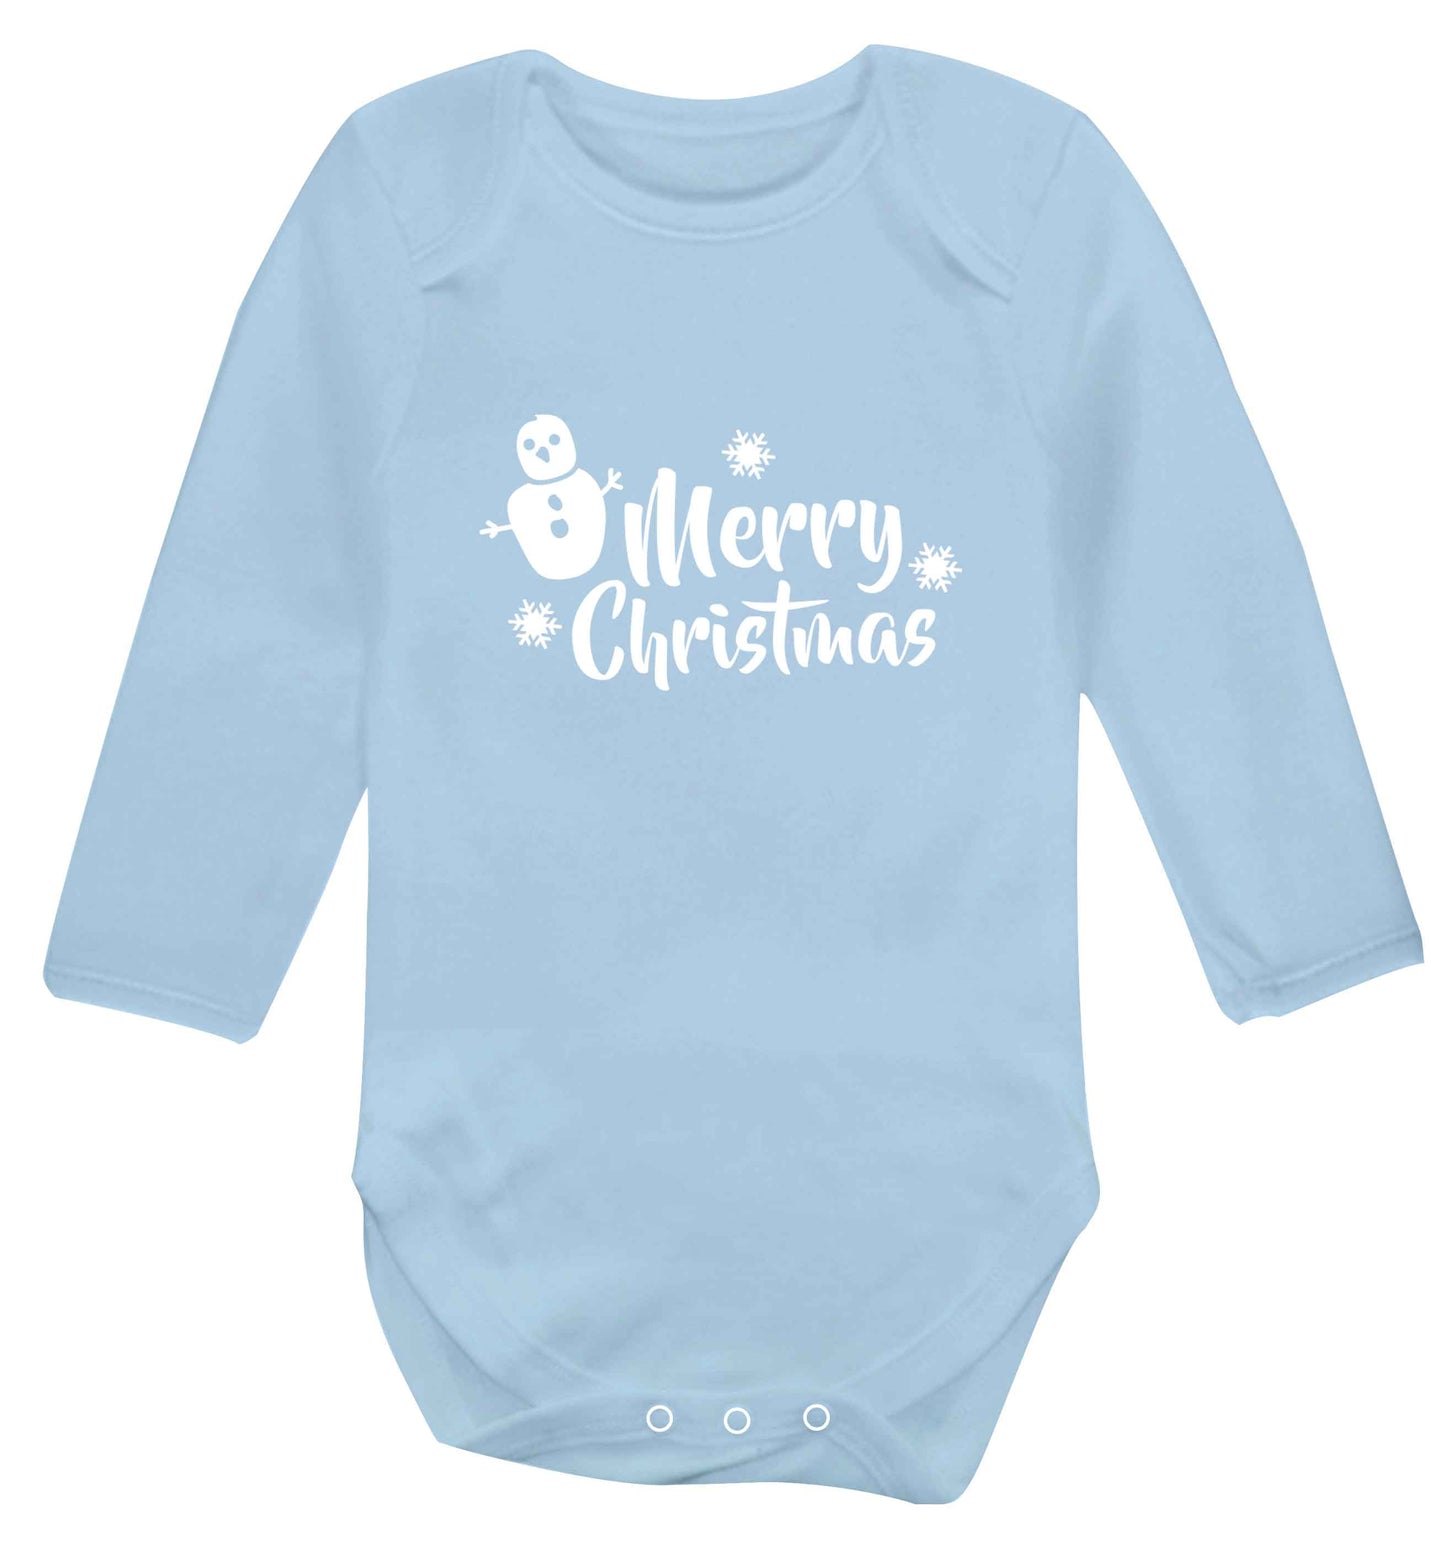 Merry Christmas - snowman baby vest long sleeved pale blue 6-12 months